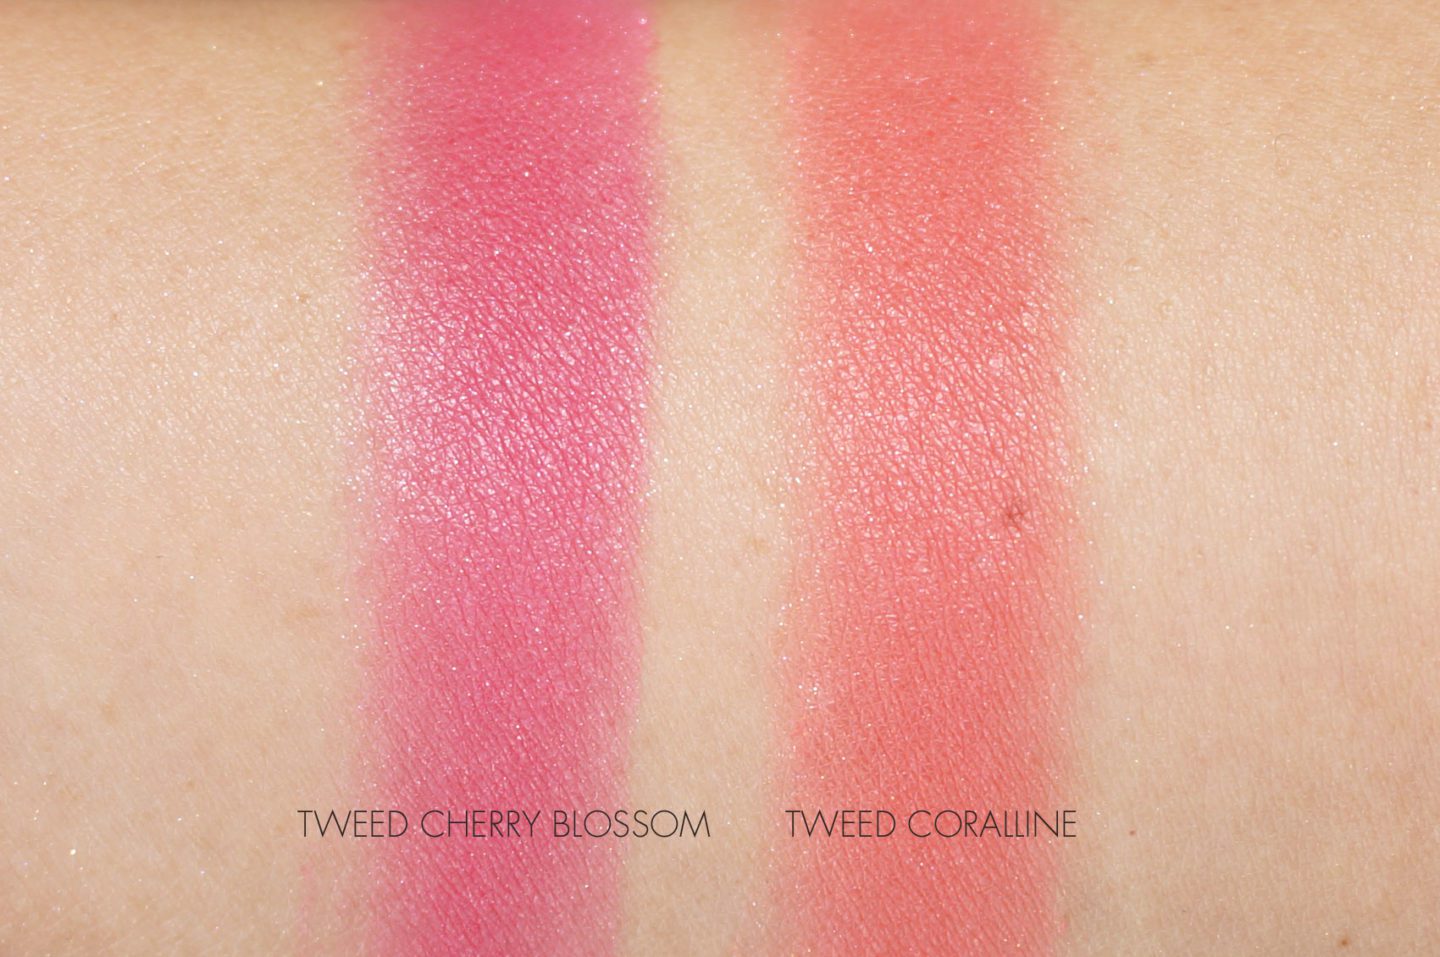 Chanel Tweed Cherry Blossom and Tweed Coralline Swatch | The Beauty Look Book